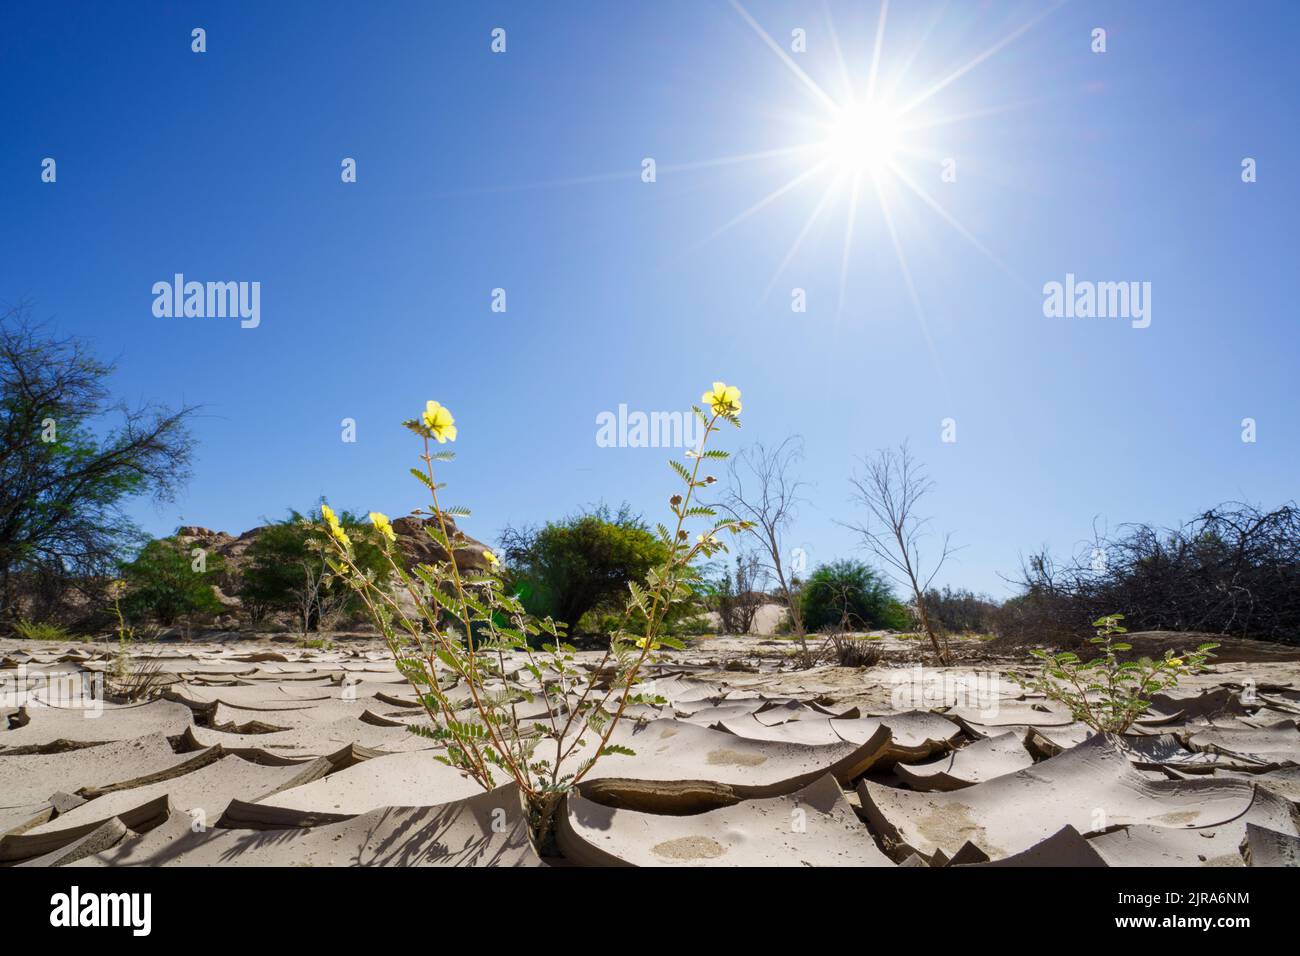 Symbolic Image, Hope, Environment, Climate Change, Green plants grow within dry river bed patterns. Swakop River, Namibia, Africa Stock Photo